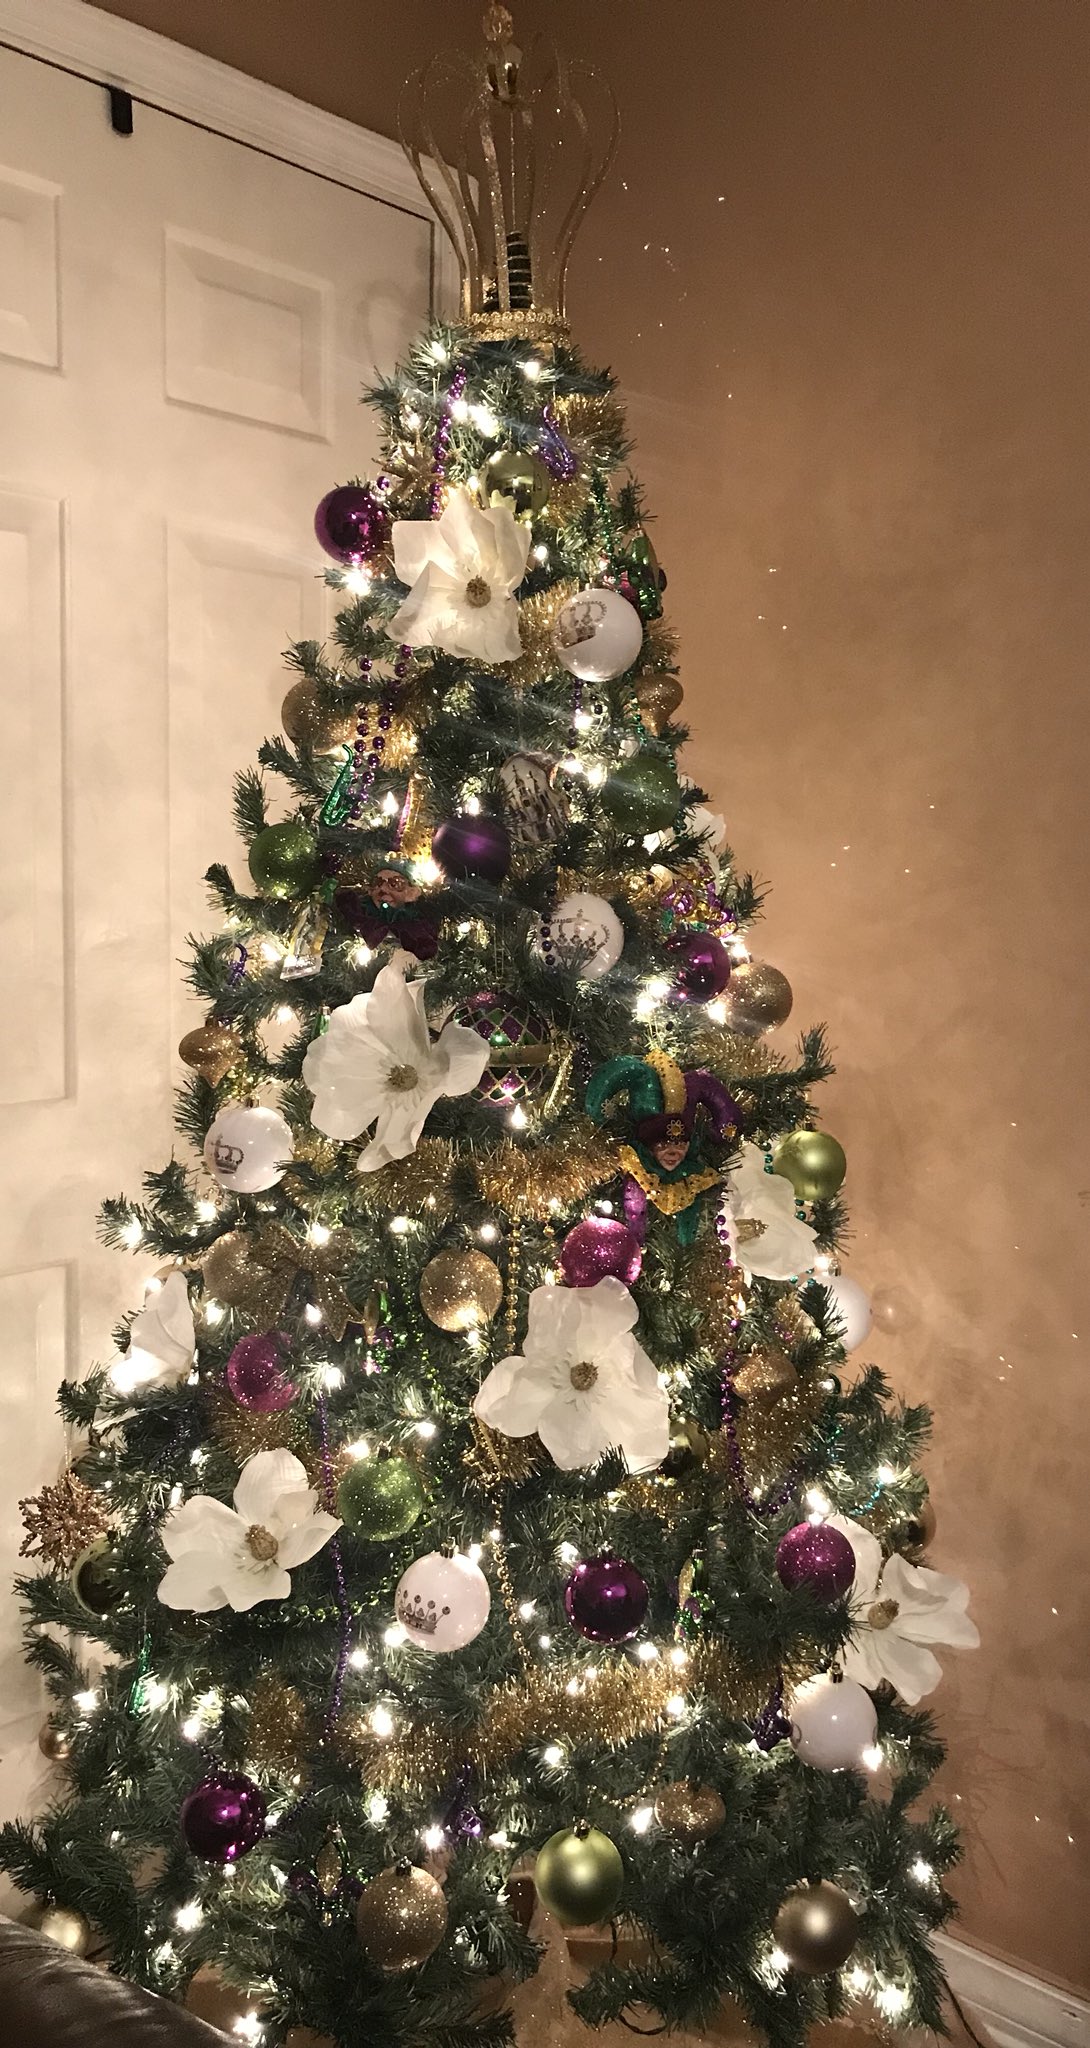 In south Louisiana, we often leave our Christmas trees up until Mardi Gras,  and we re-decorate them for Mardi Gras! : r/christmas